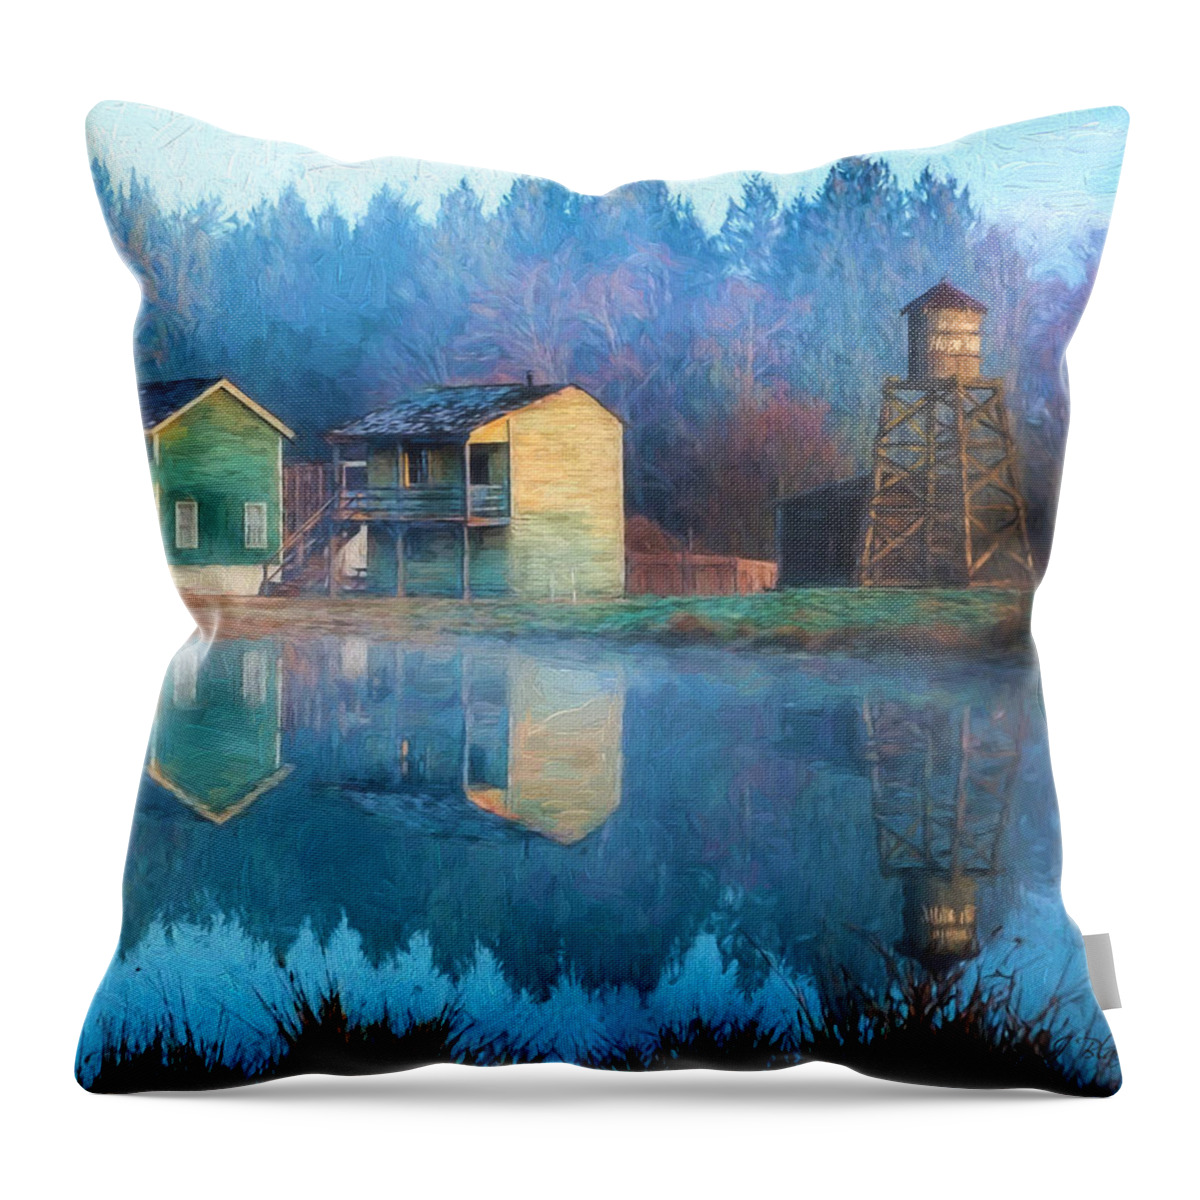 Reflections Of Hope Throw Pillow featuring the painting Reflections Of Hope - Hope Valley Art by Jordan Blackstone